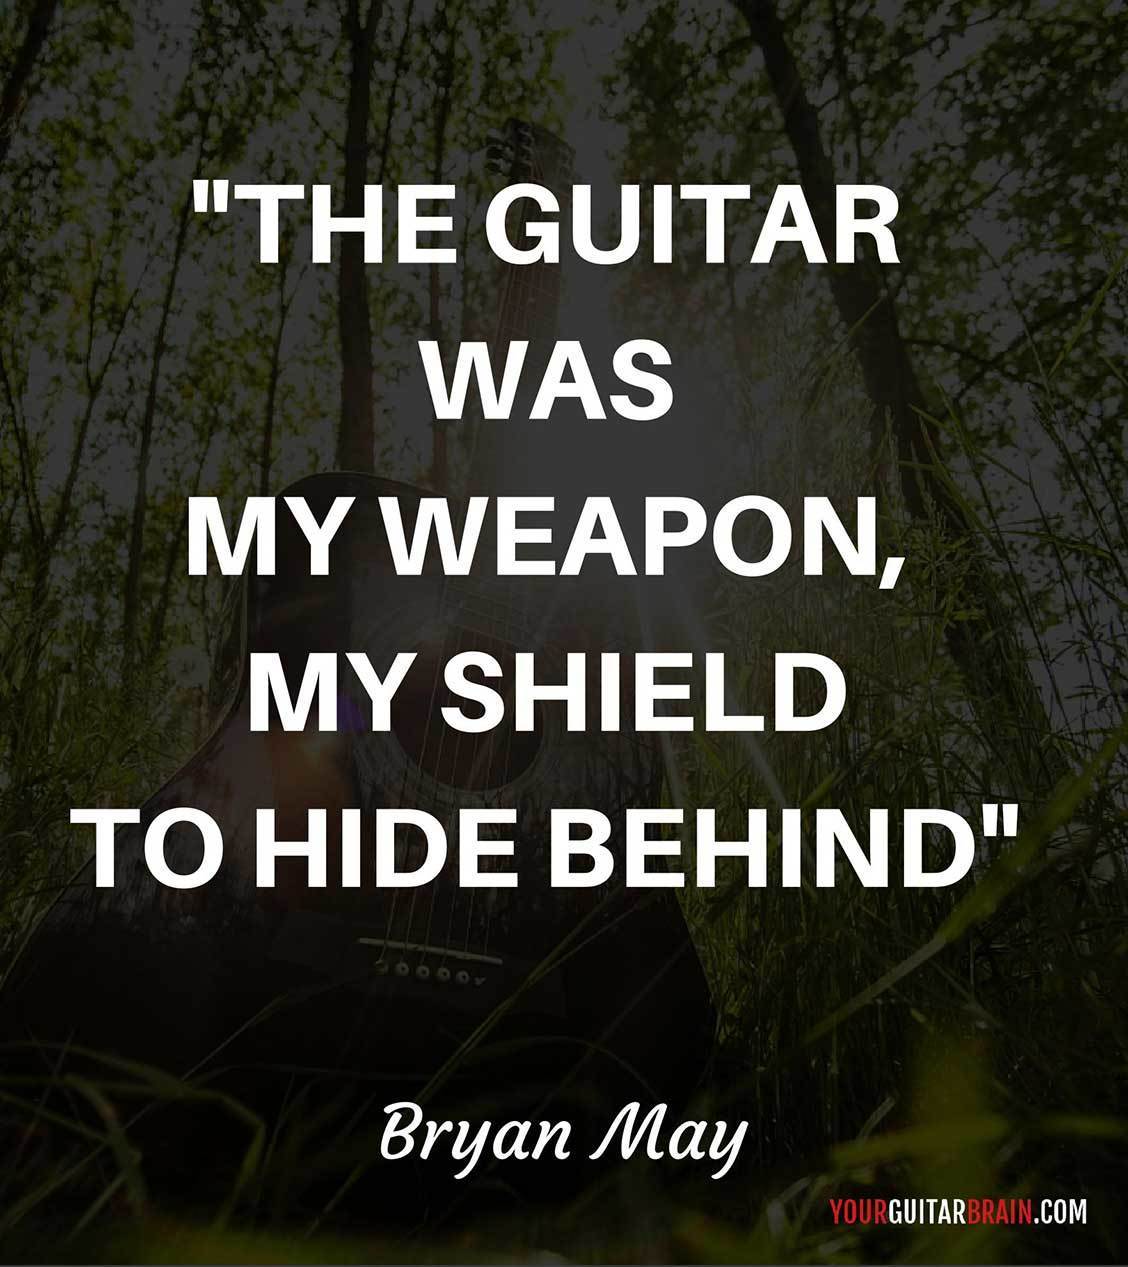 the guitar was my weapon my shield to hide behind. bryan may